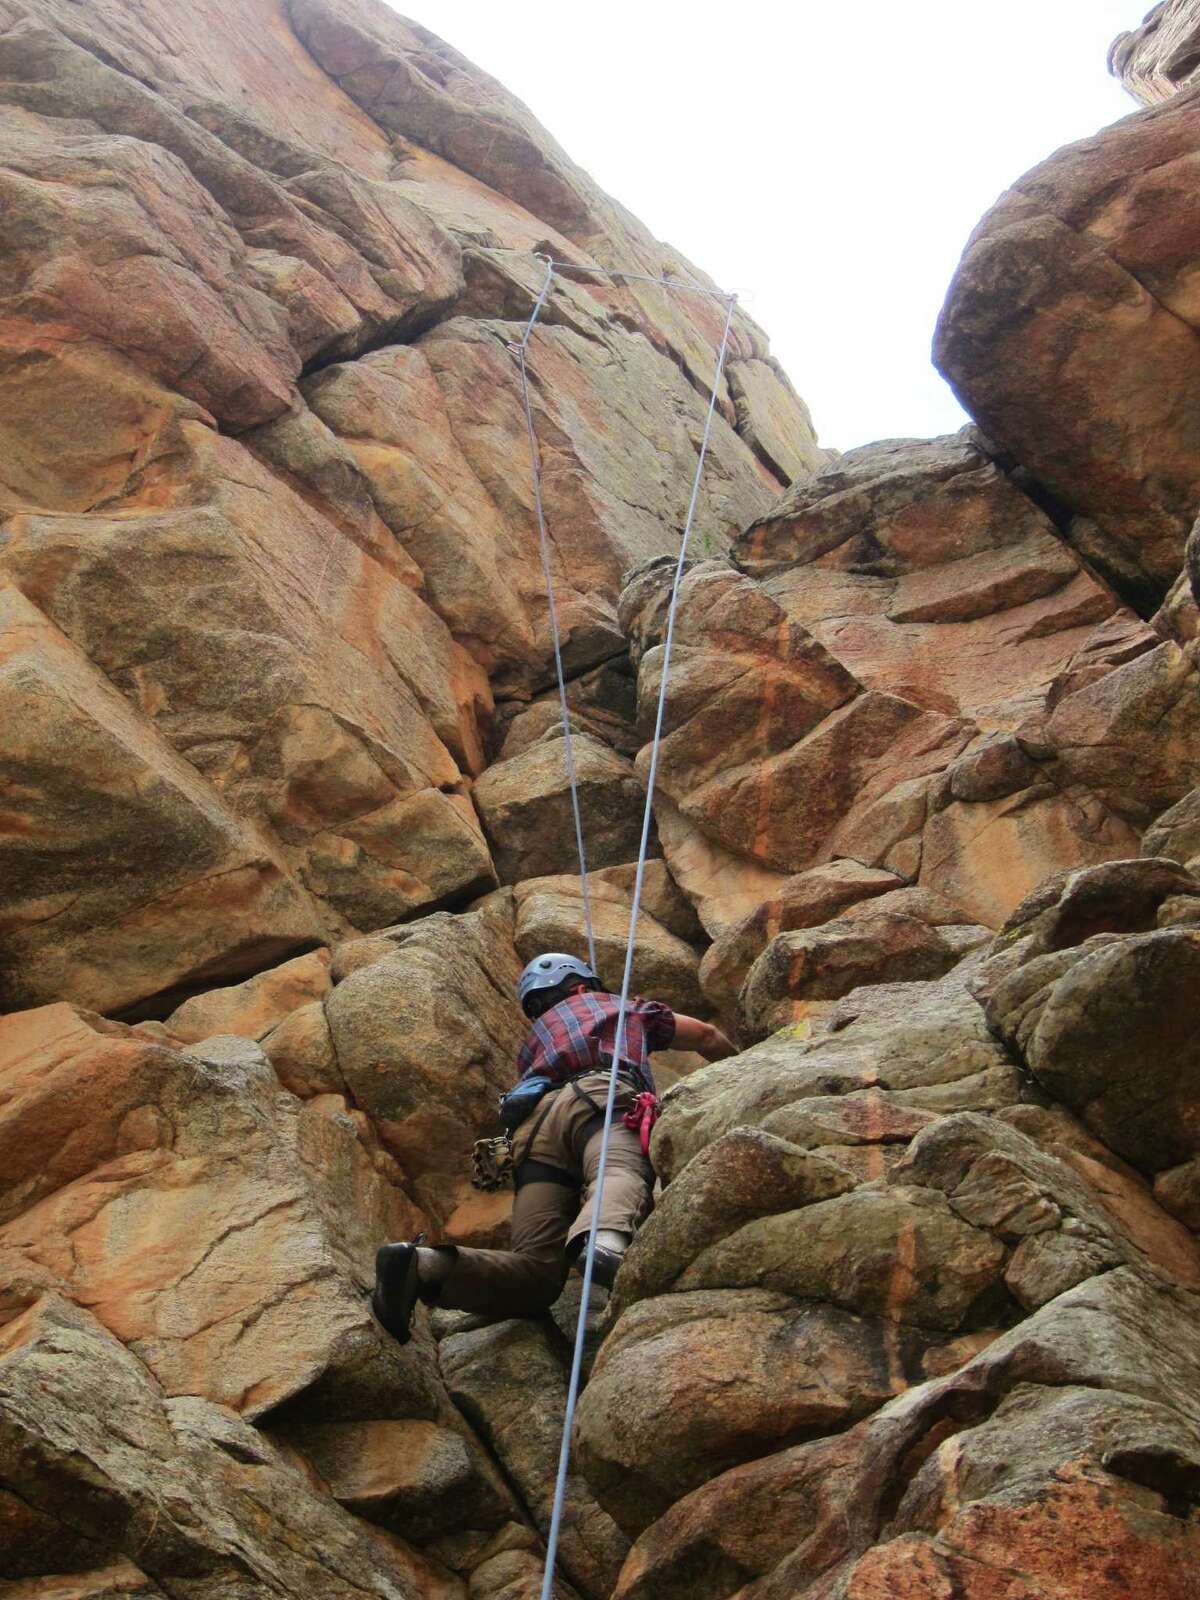 Jay Cummiskey's wilderness expedition ended with climbing the crags of Unaweep, Colorado.